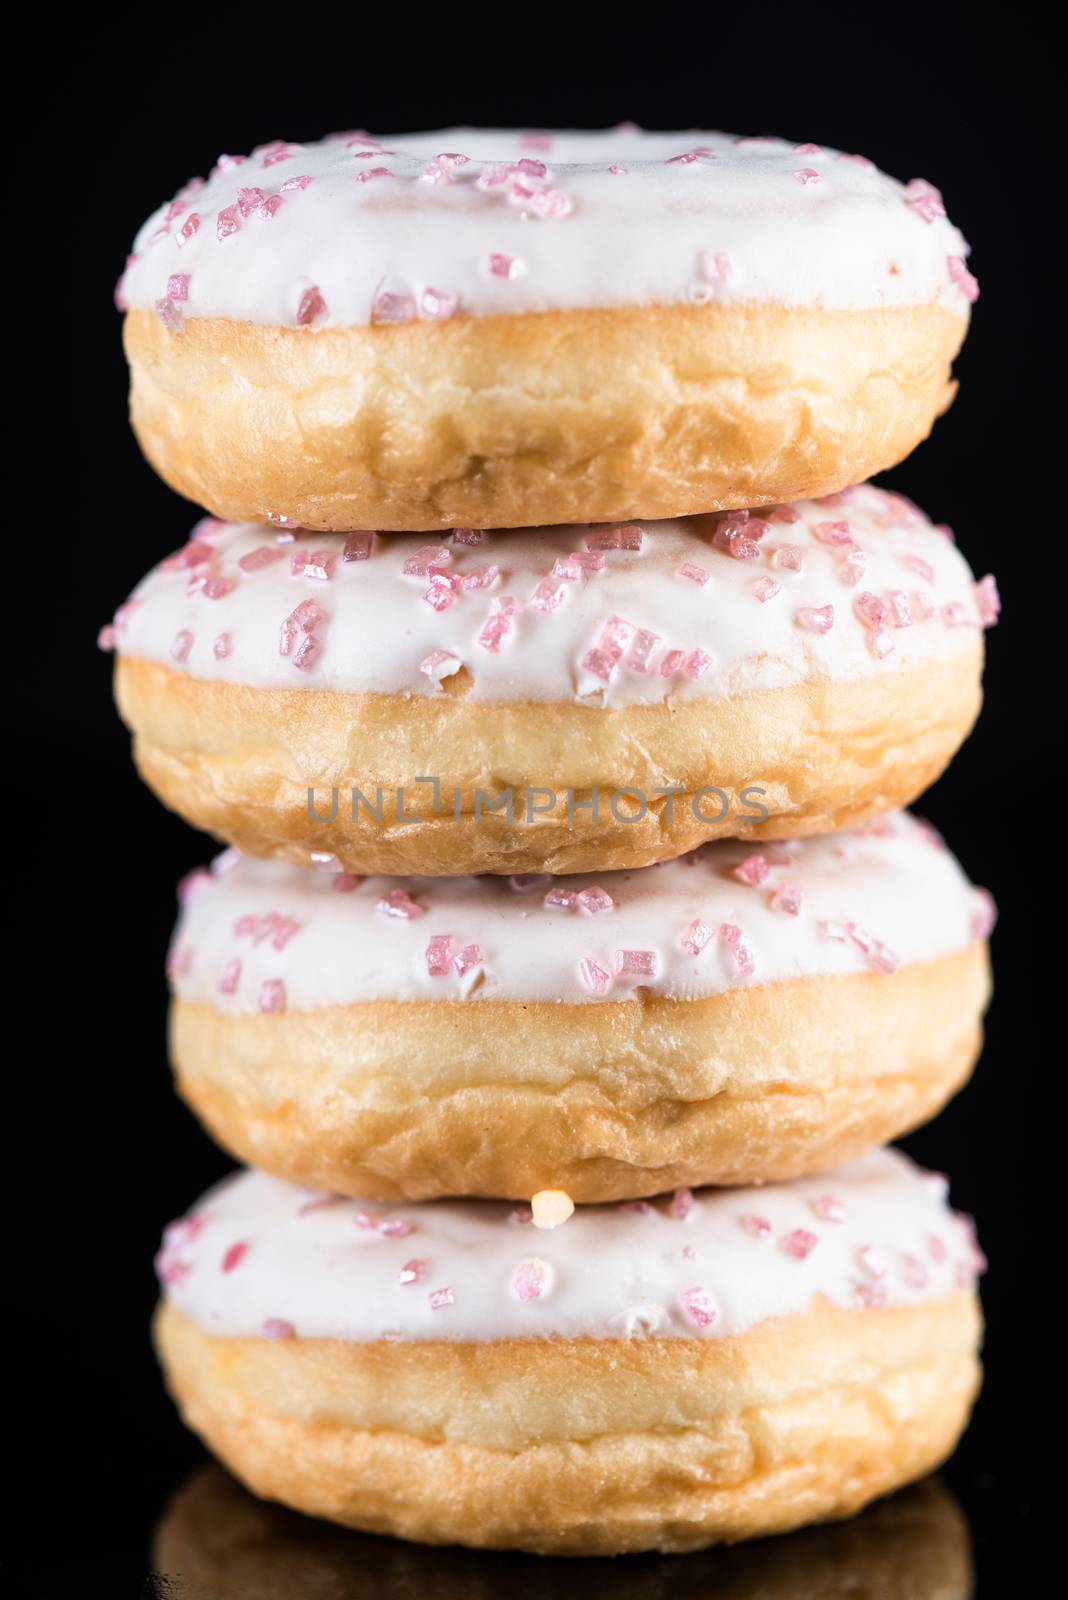 White Chocolate Donuts or Doughnuts Tower on Dark Background .